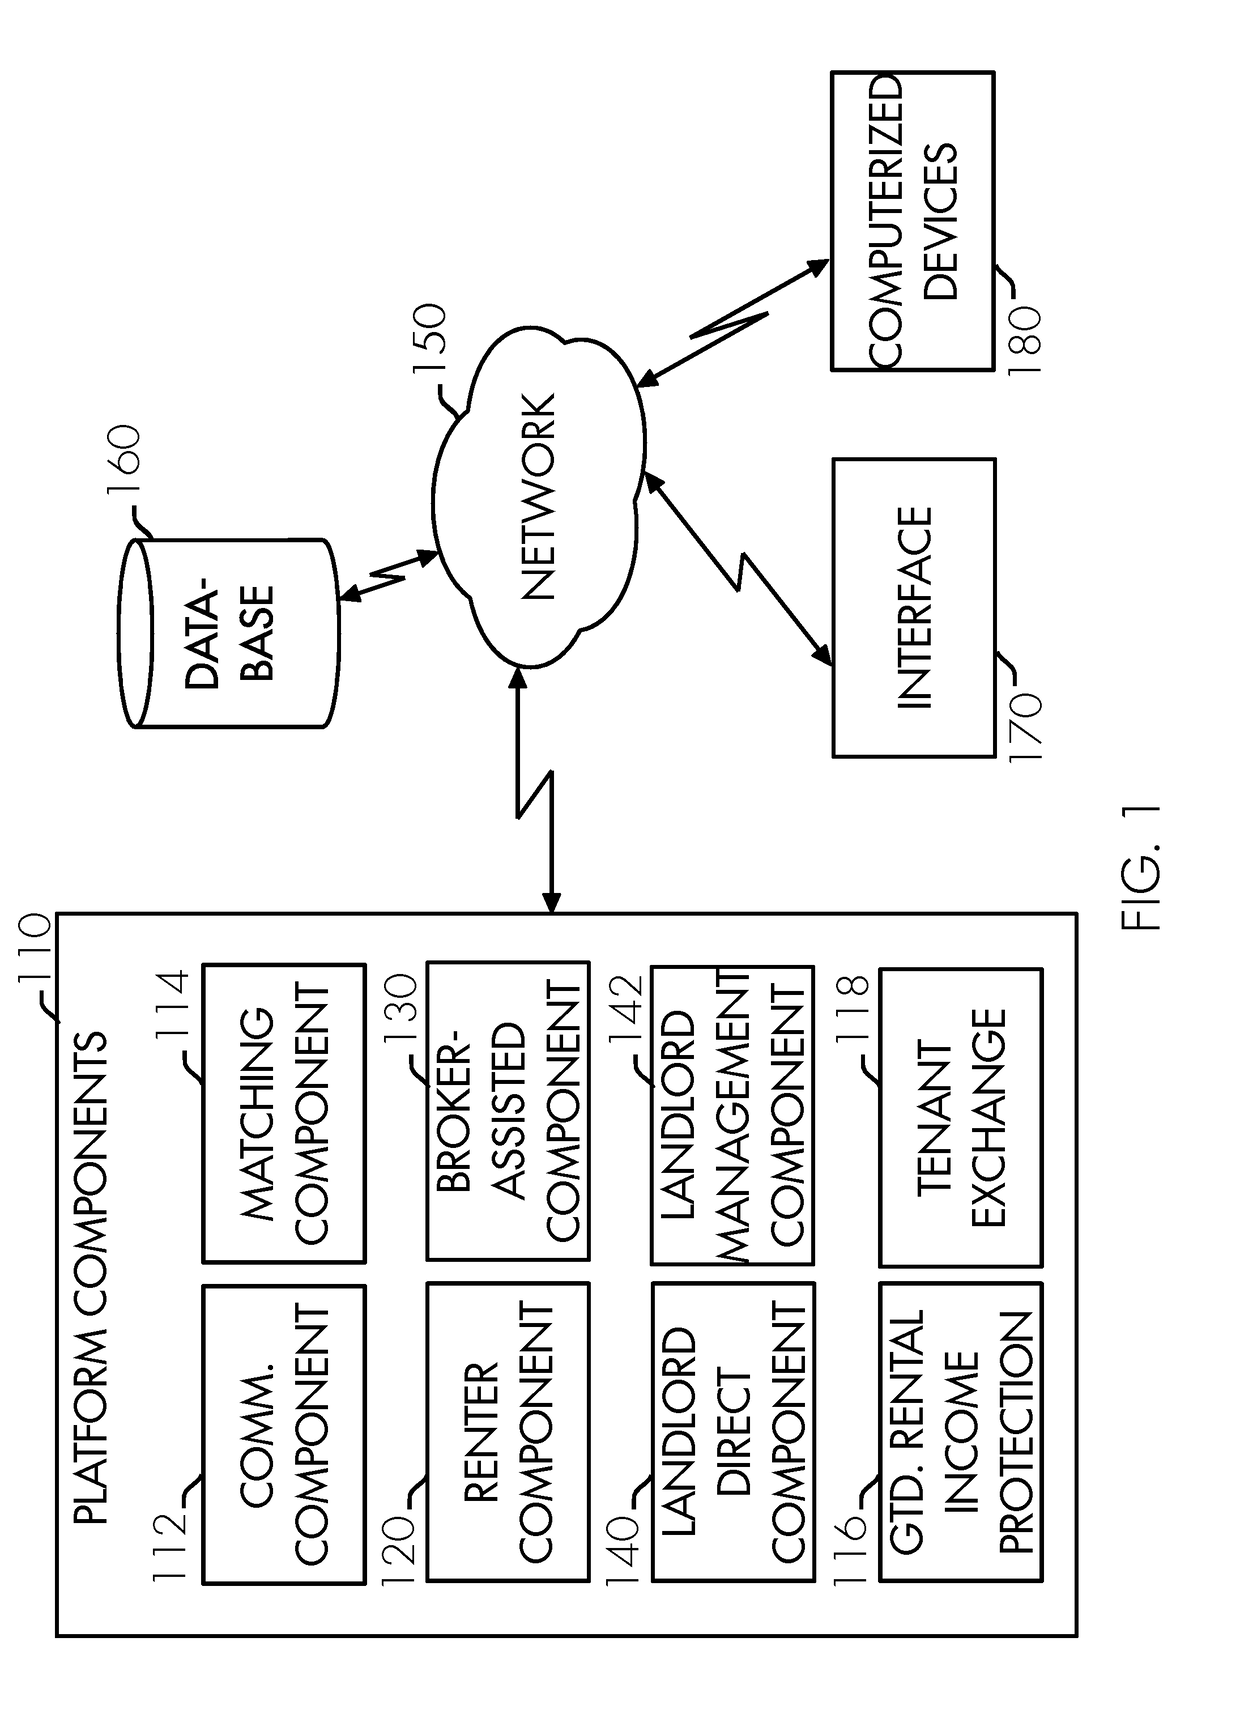 Decentralized cryptographic real estate transaction assistance system and method